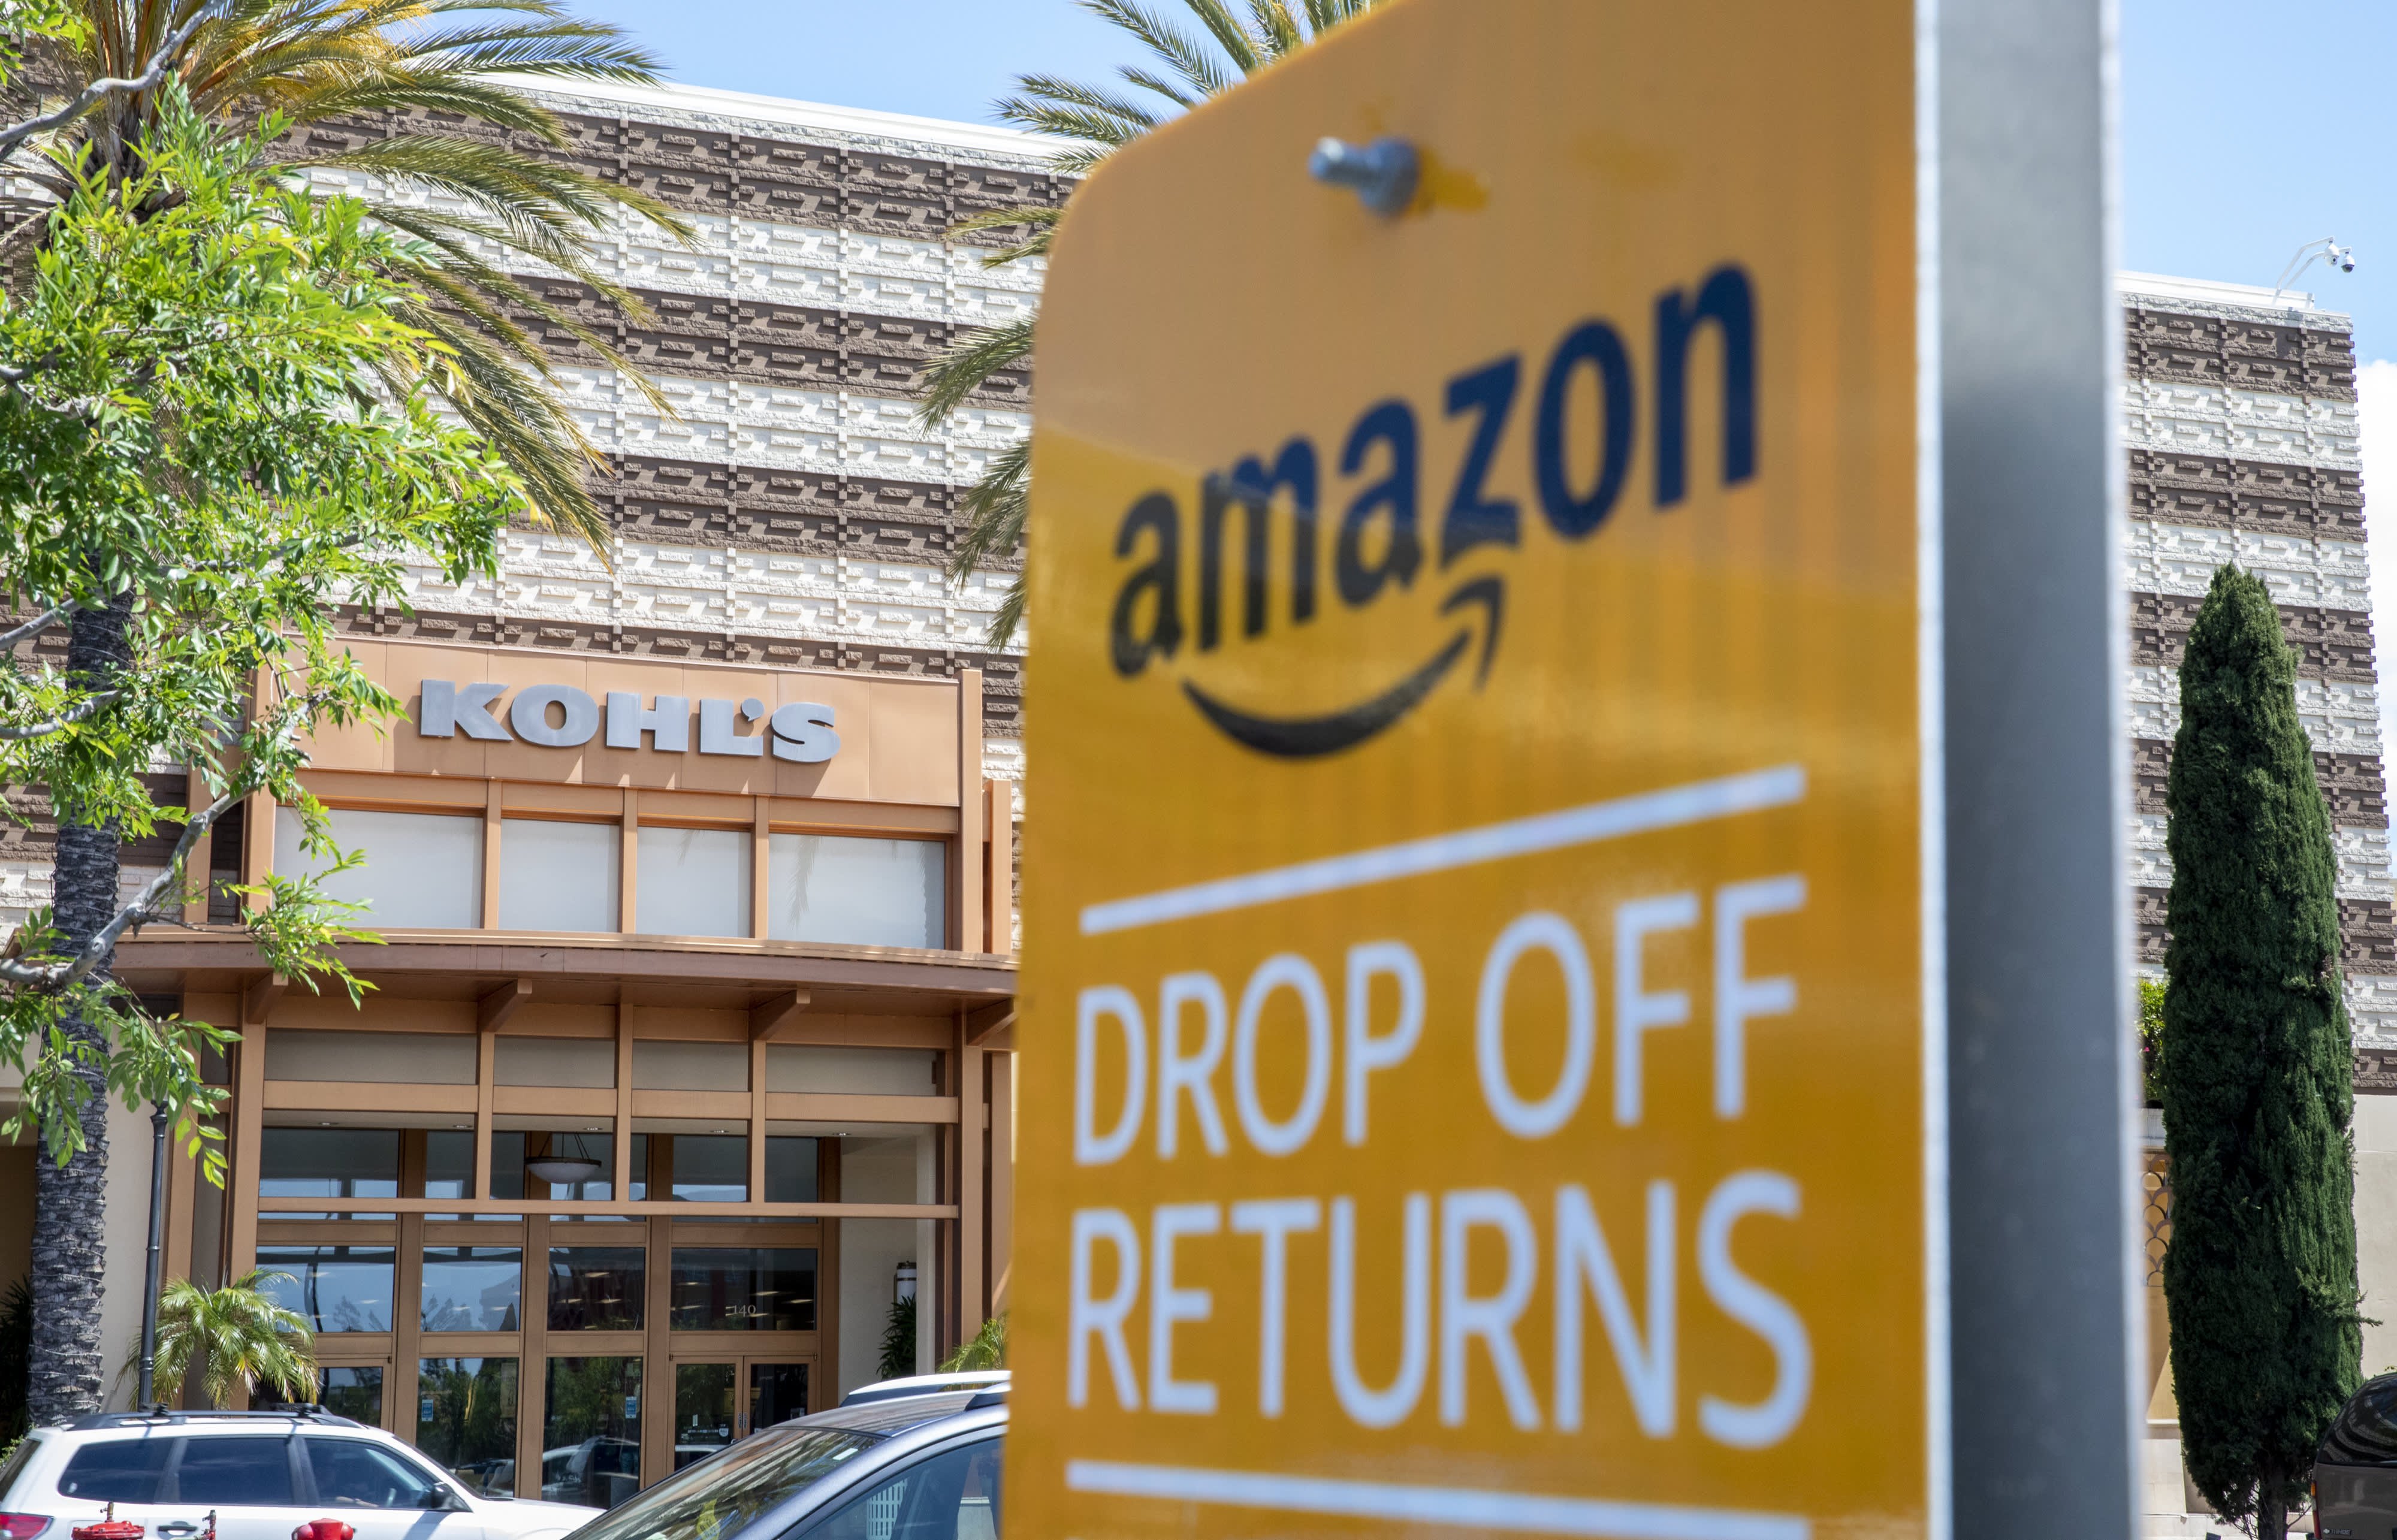 Kohl’s says it added 2 million new customers in 2020, thanks to Amazon